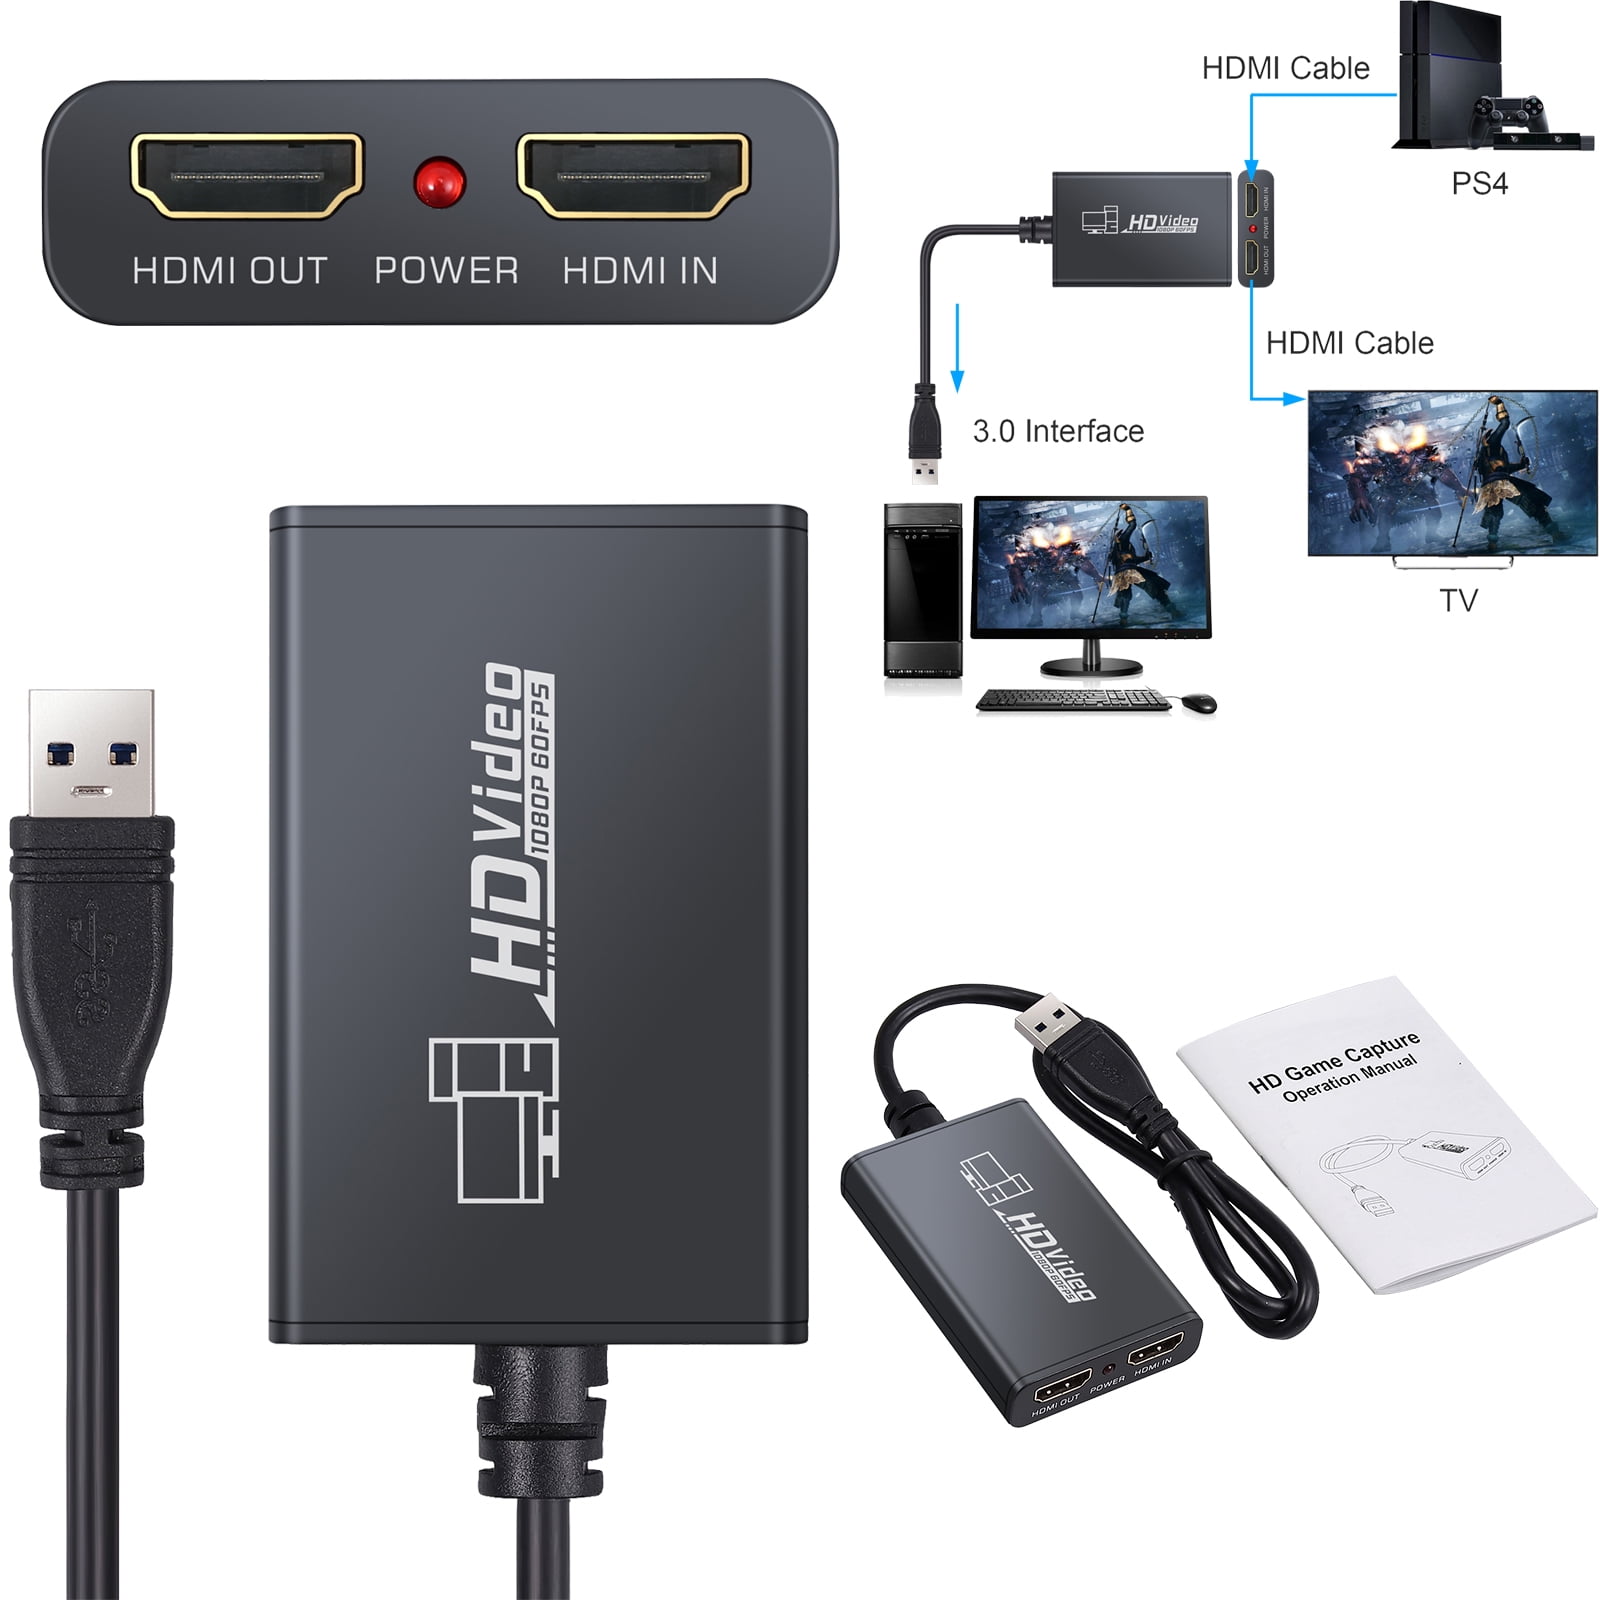 eSynic HDMI Capture Card HDMI to USB 3.0 Live Video Capture Game Capture with HDMI Loop-Out Microphone Input 1080P HDMI USB 3.0 Adapter Video and Audio Grabber for Windows Linuxs Mac OS PS3/4 Wii U 